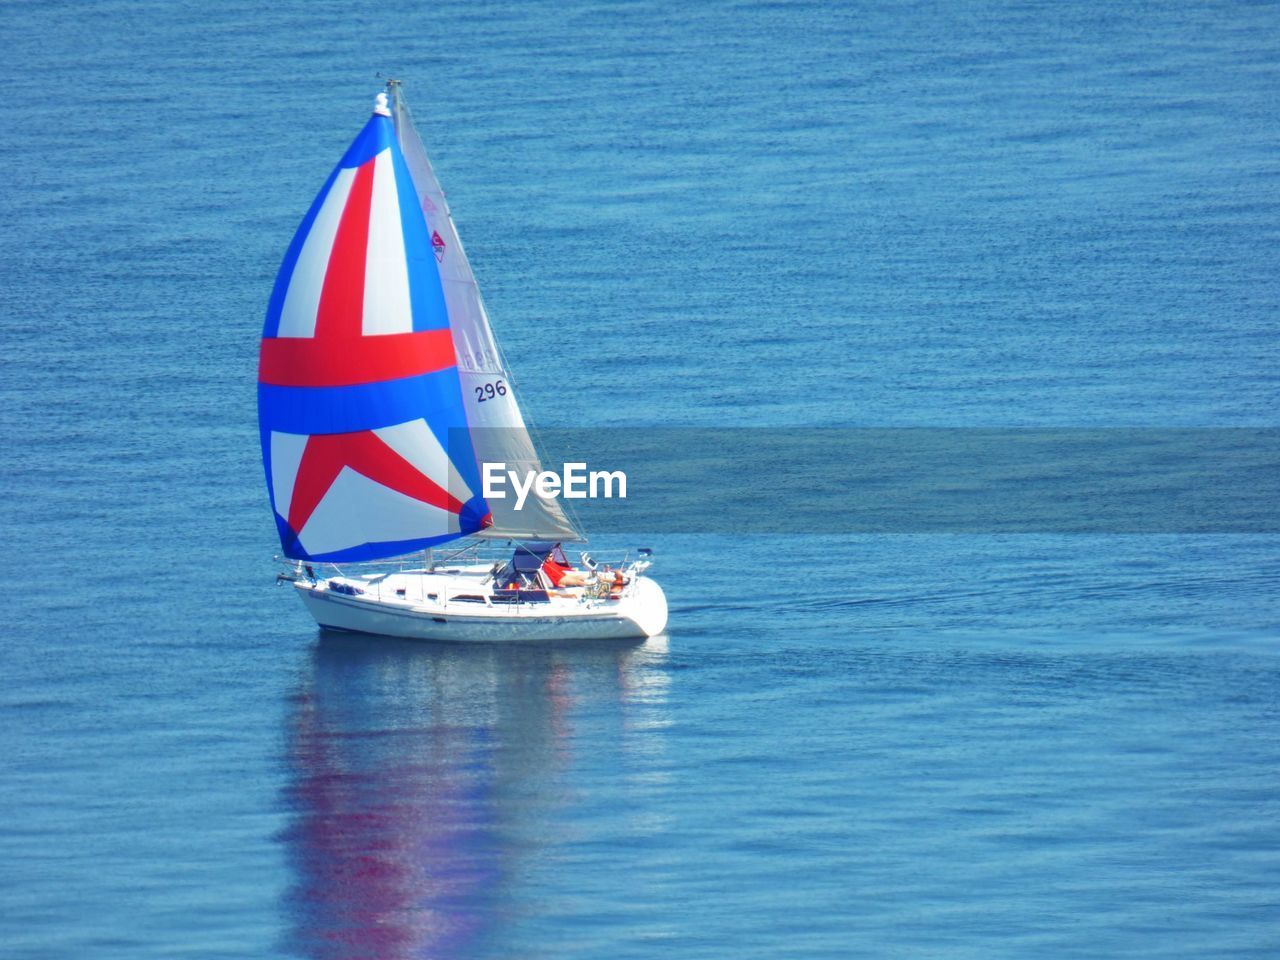 BOAT SAILING IN SEA AGAINST BLUE SKY